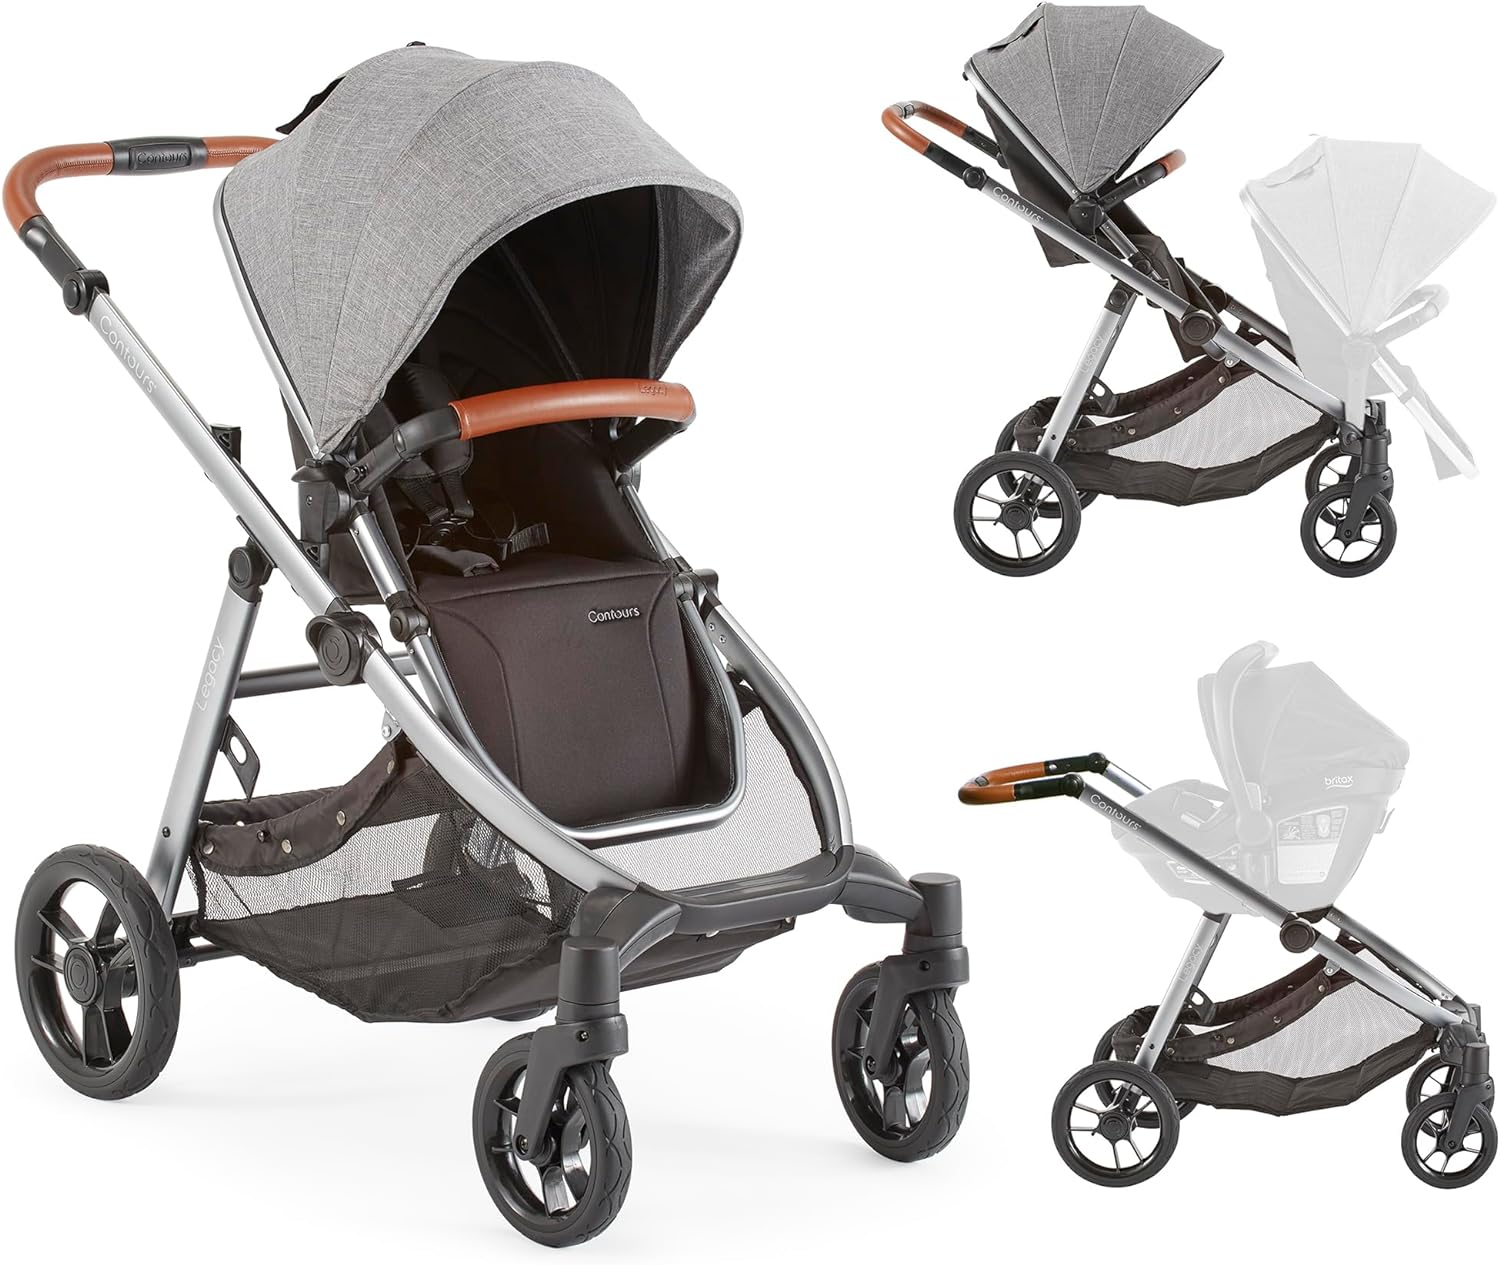 Contours Legacy Convertible Baby Stroller Review